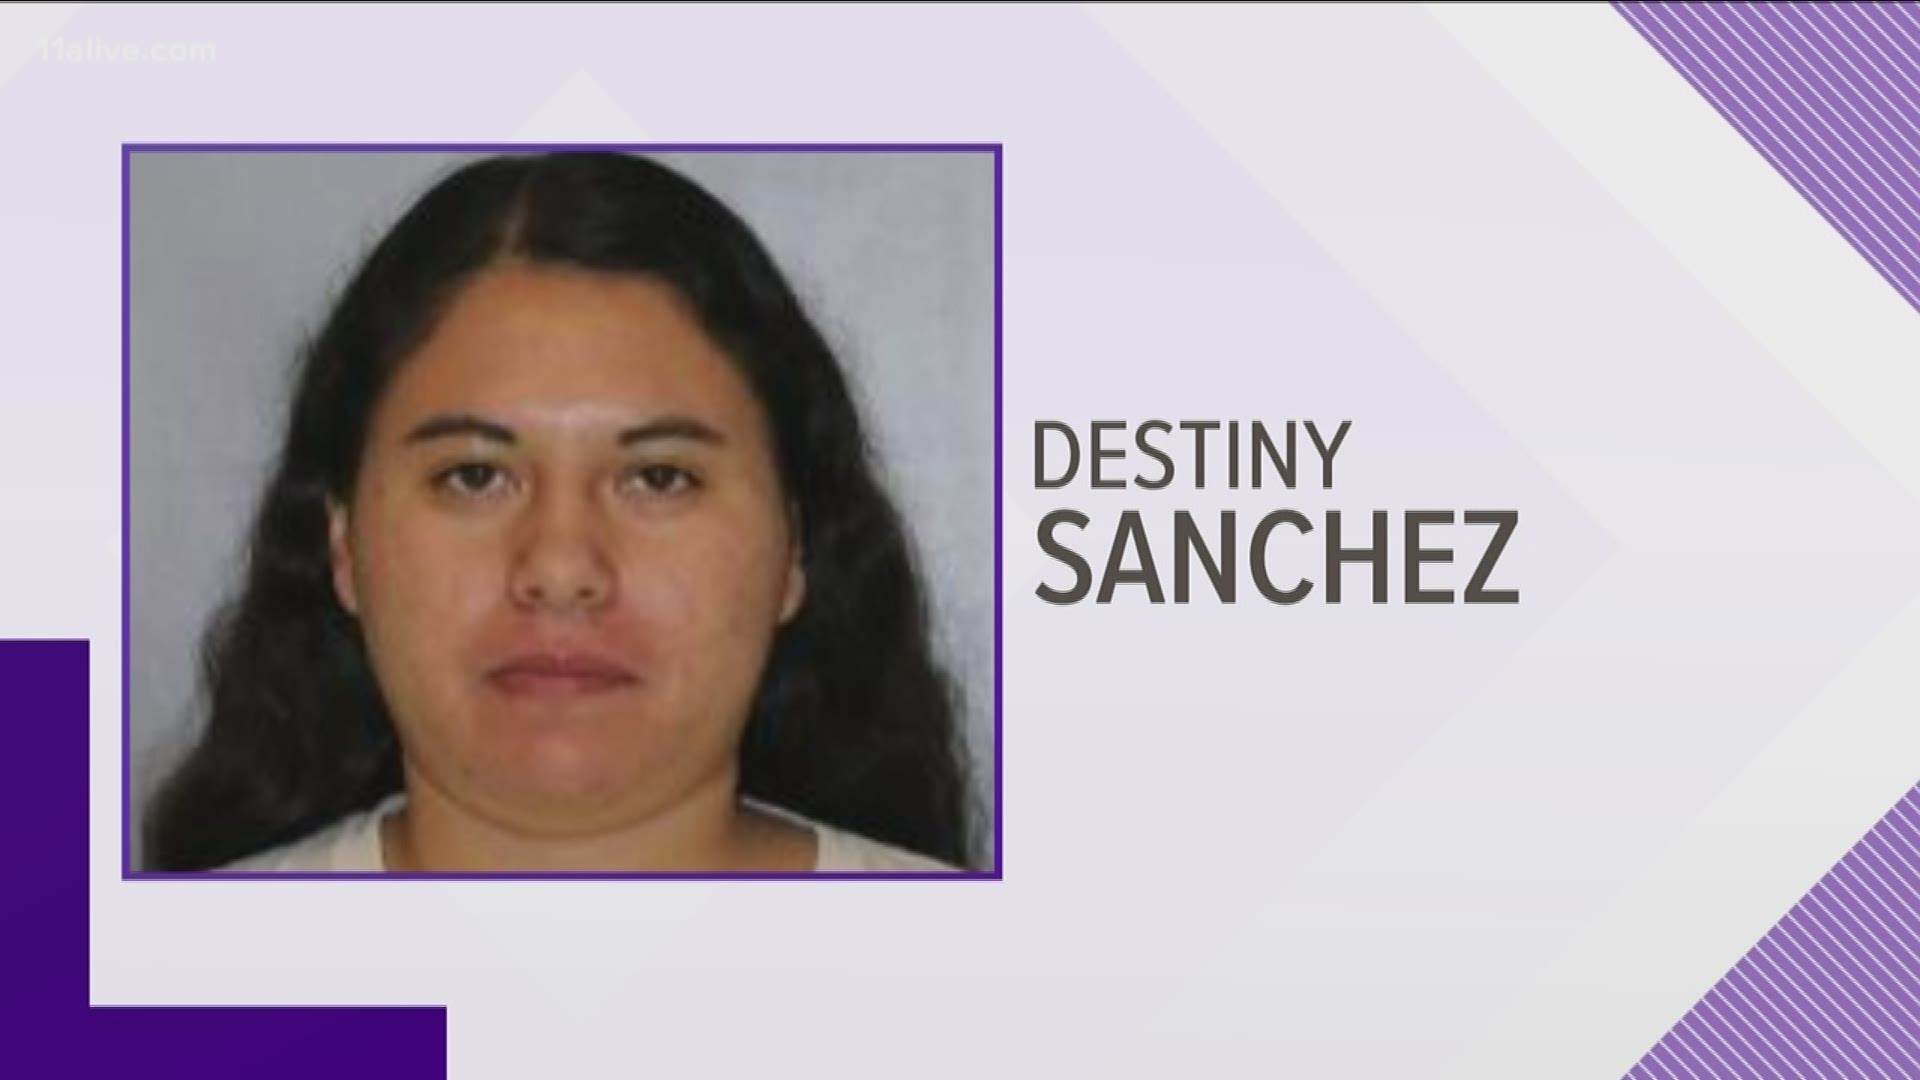 The district said Destiny Sanchez was already on probation for making bomb threats.